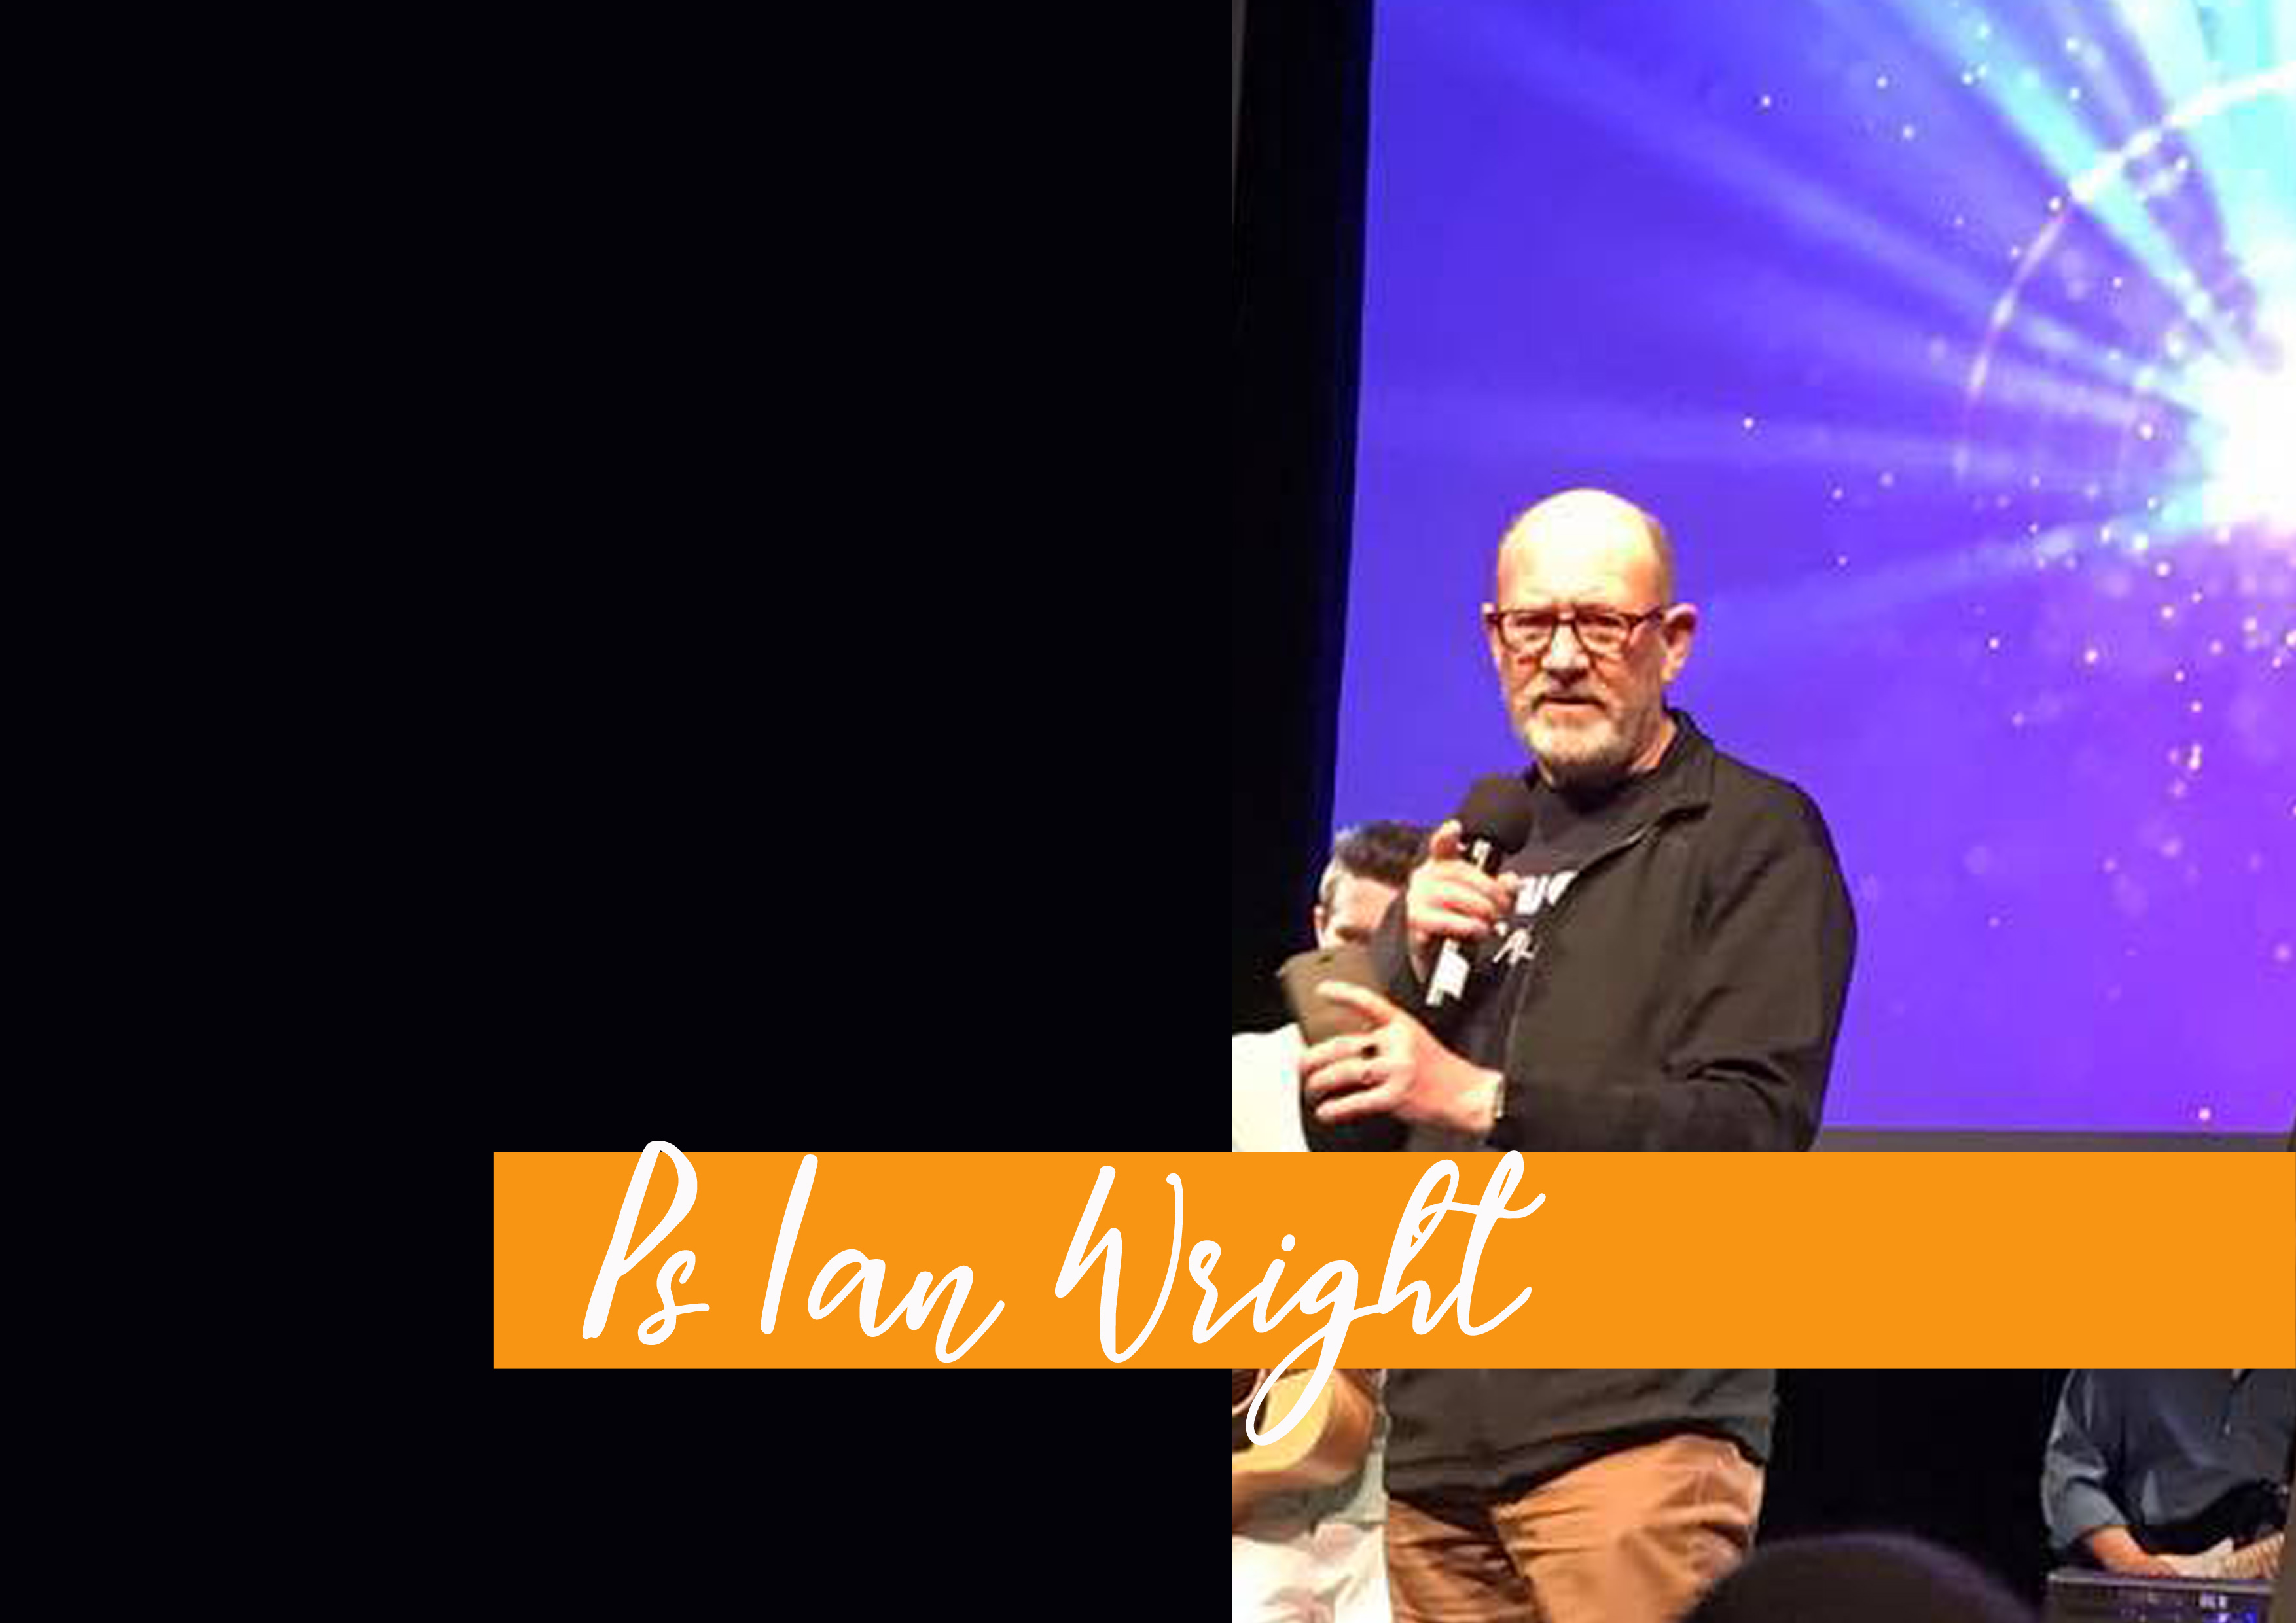 Ps Ian Wright - Heritage, Legacy & the Holy Spirit